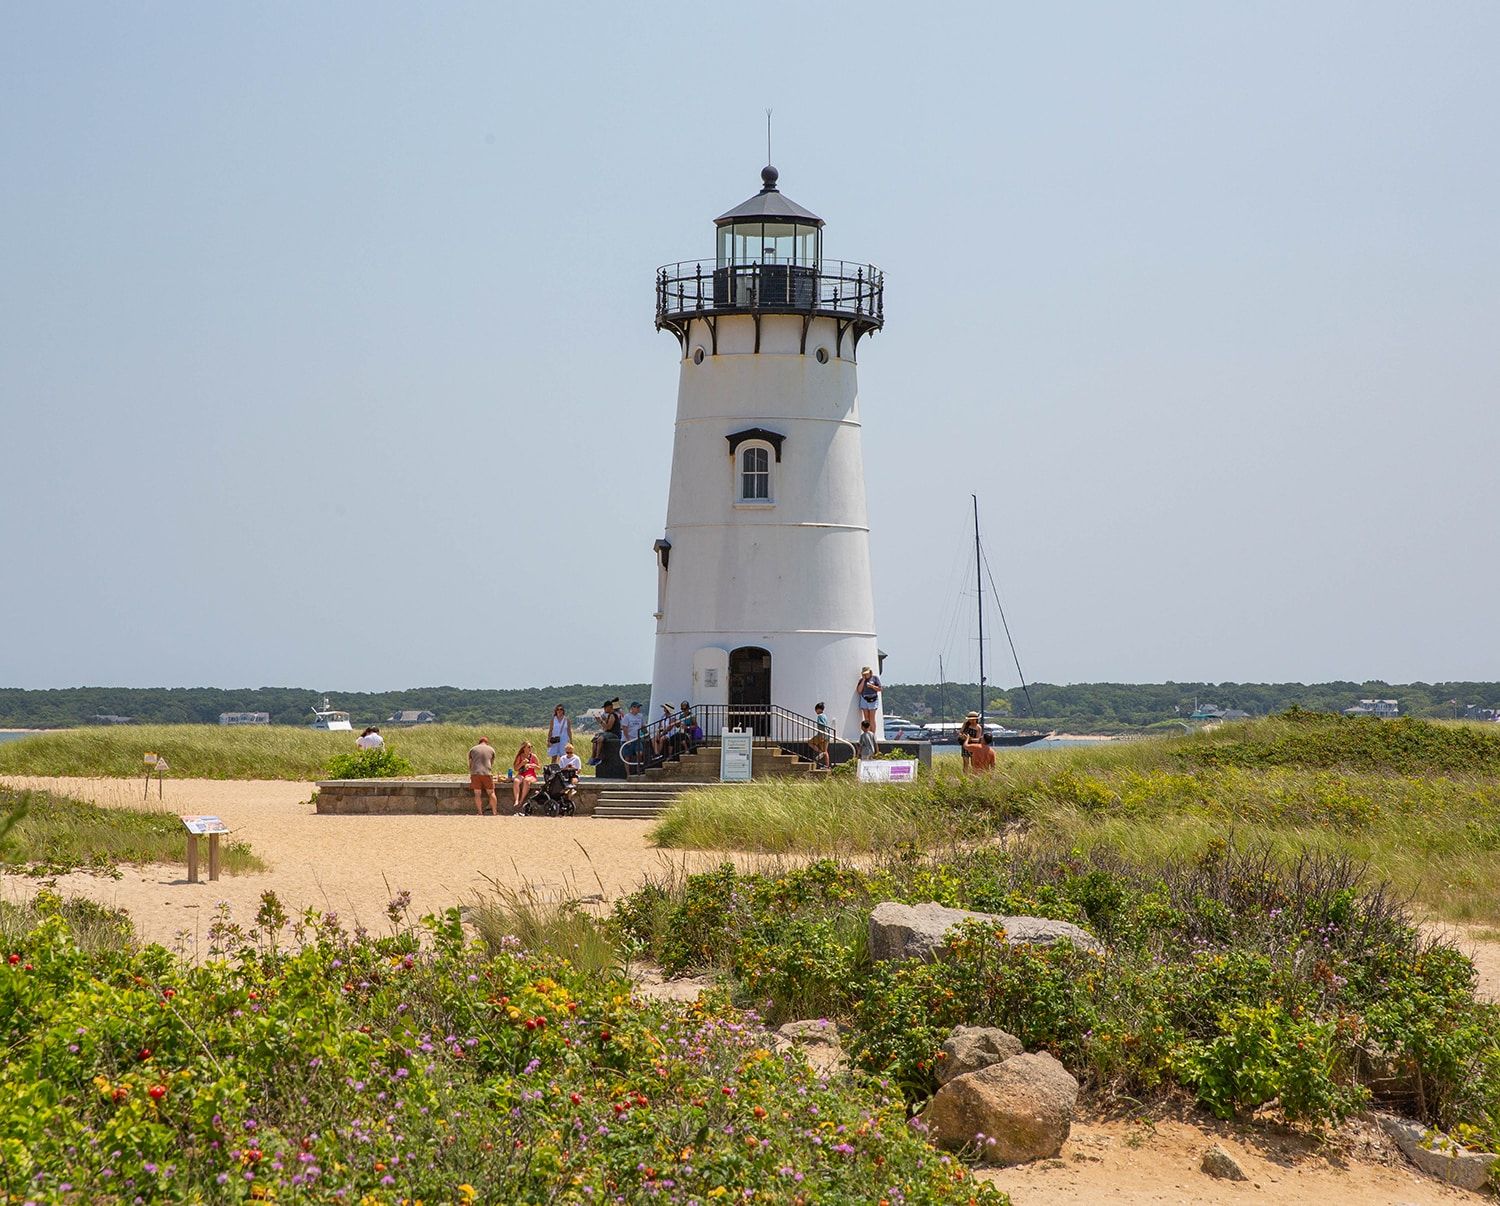 Edgartown | 2 Days in Cape Cod Itinerary